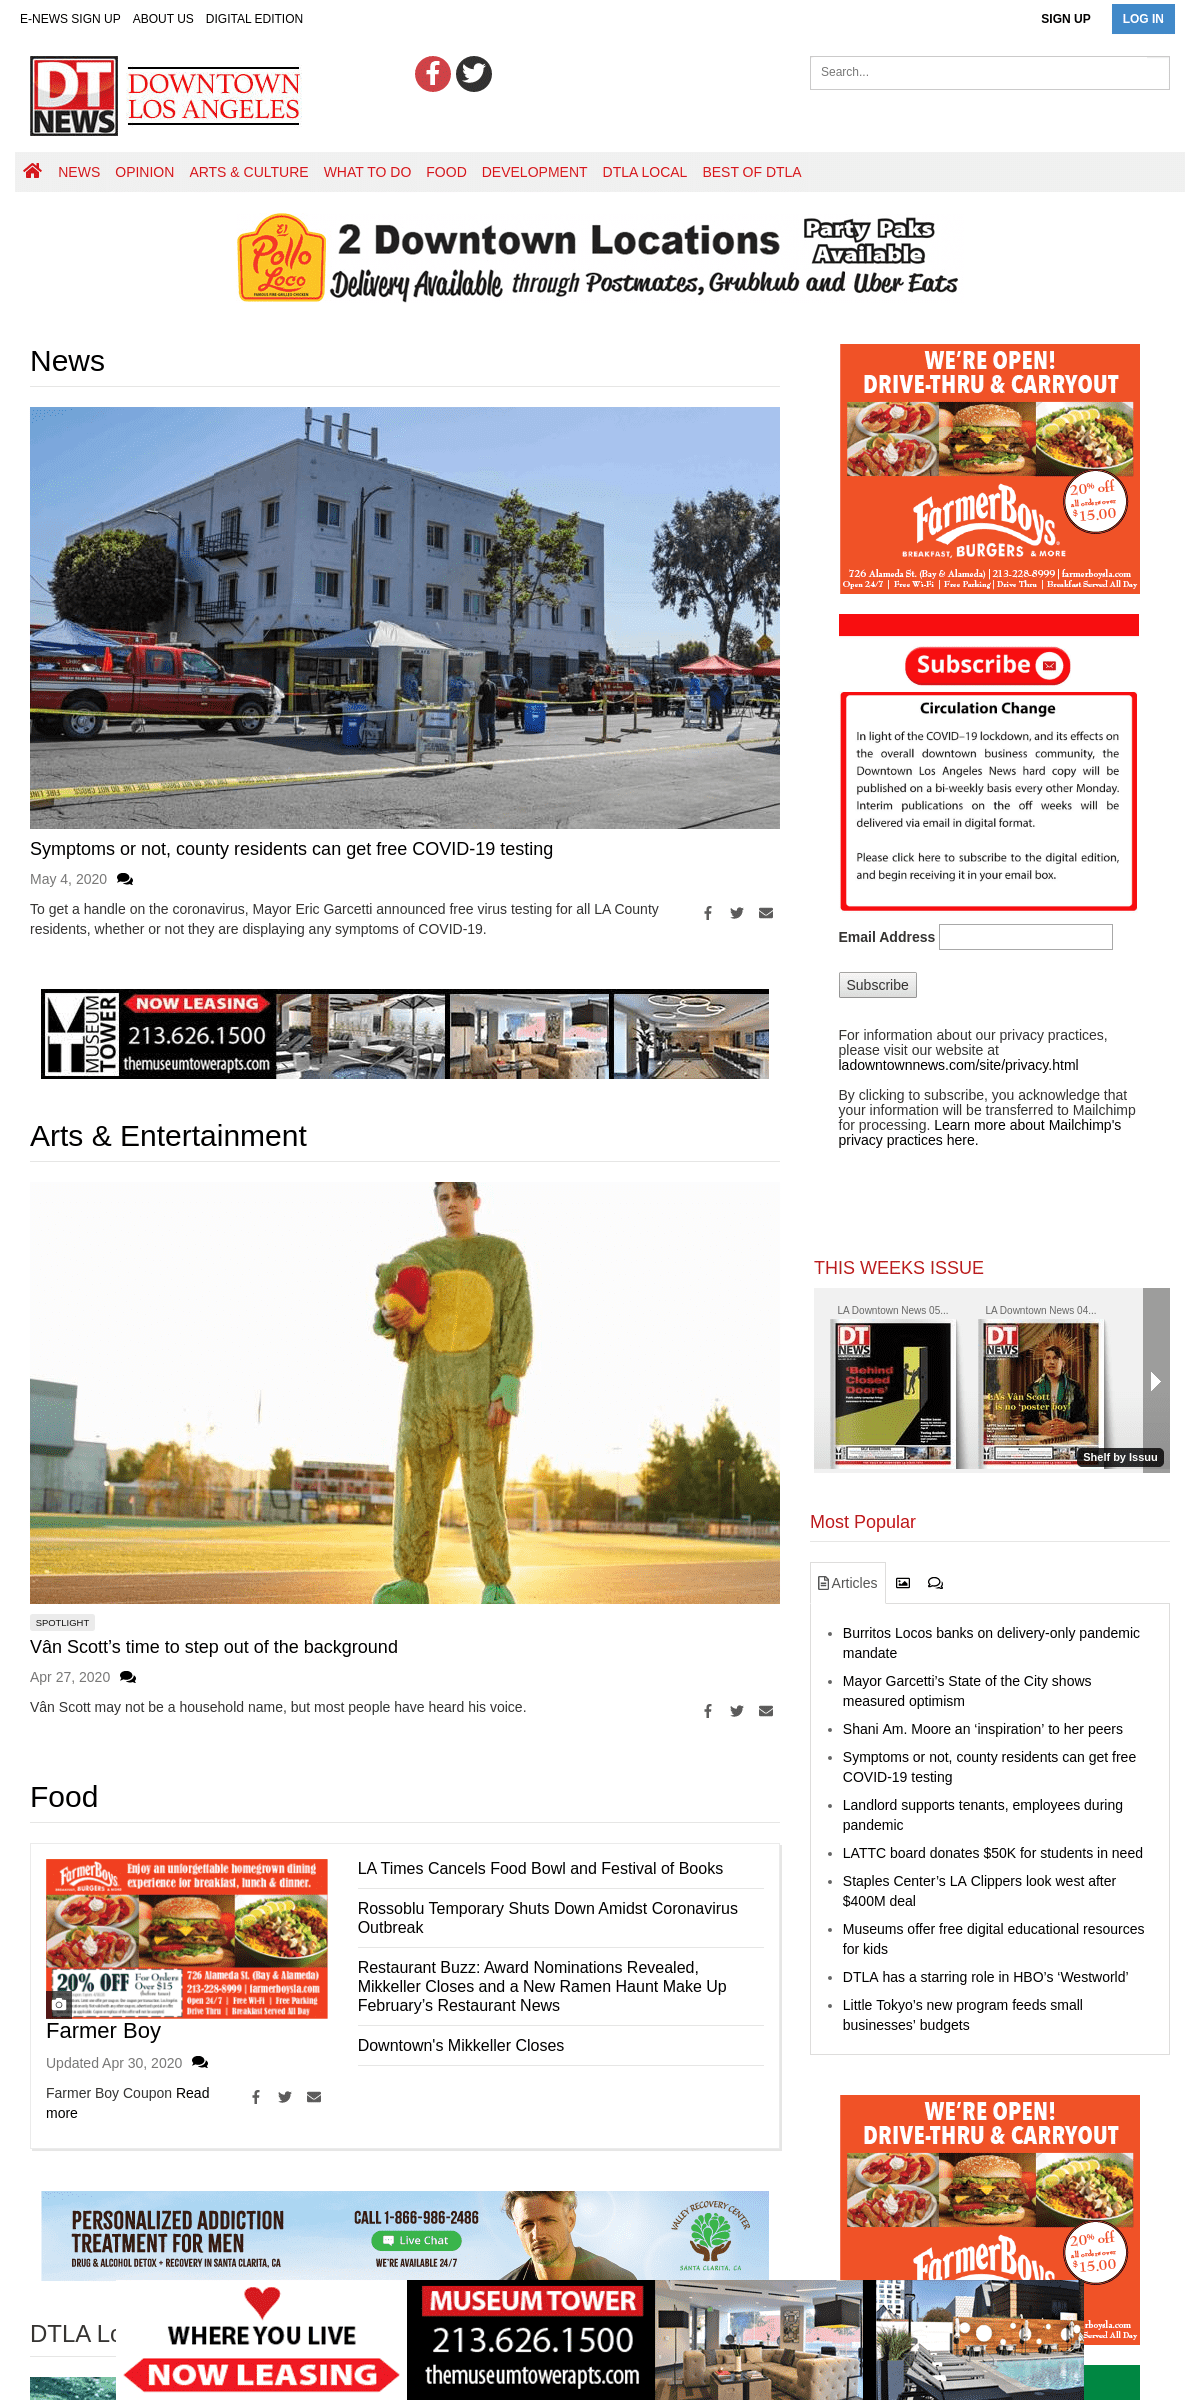 A complete backup of downtownnews.com